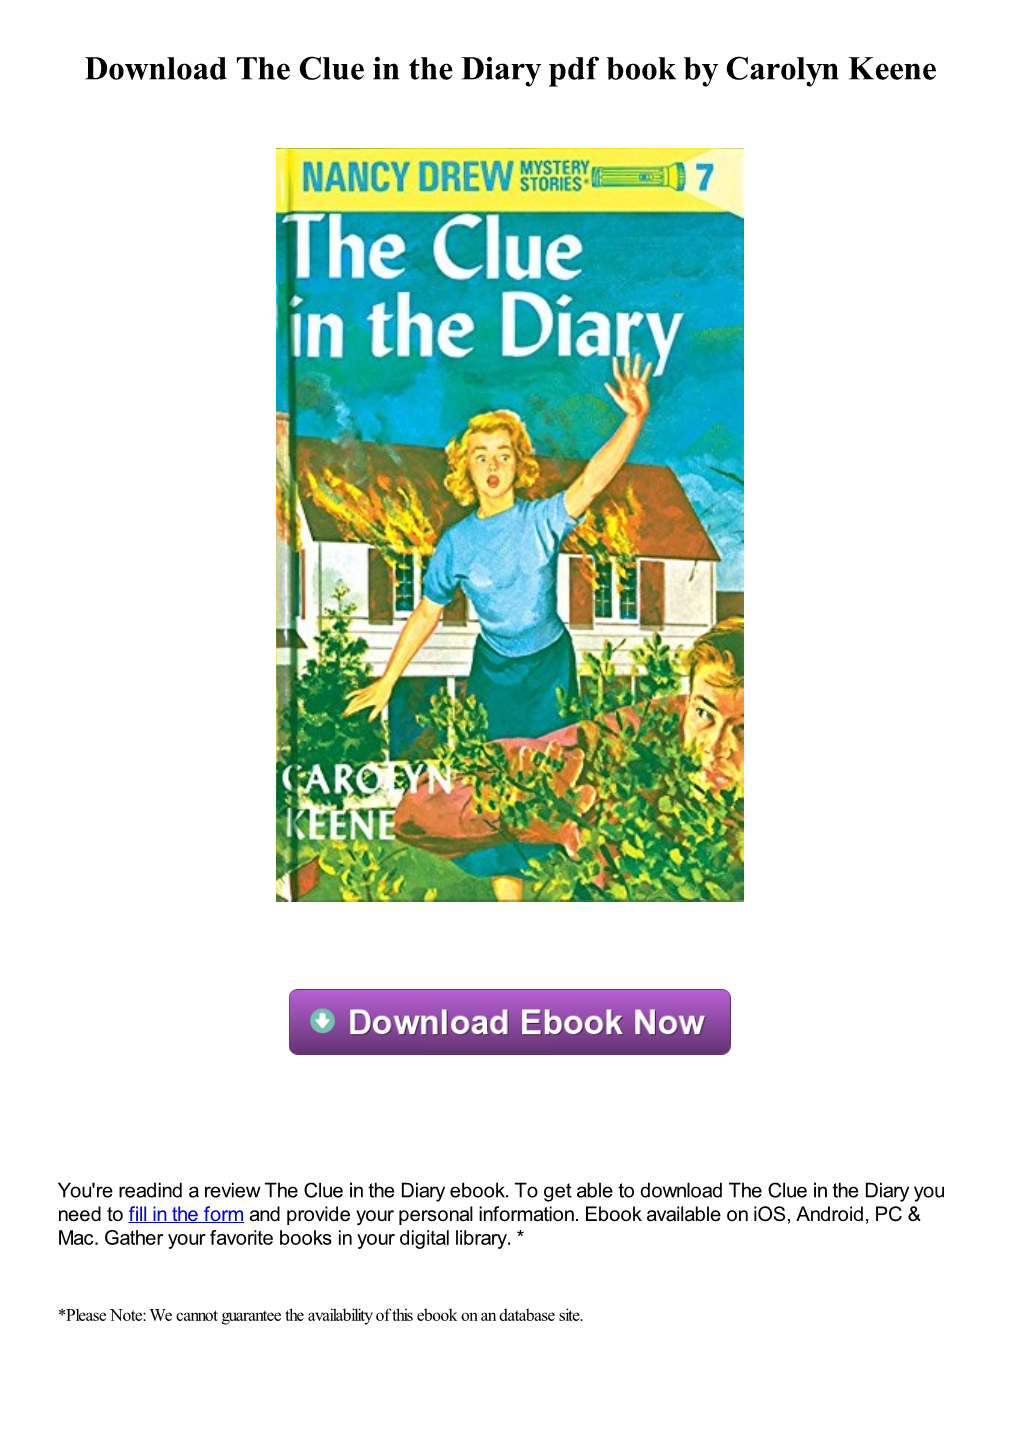 Download the Clue in the Diary Pdf Book by Carolyn Keene